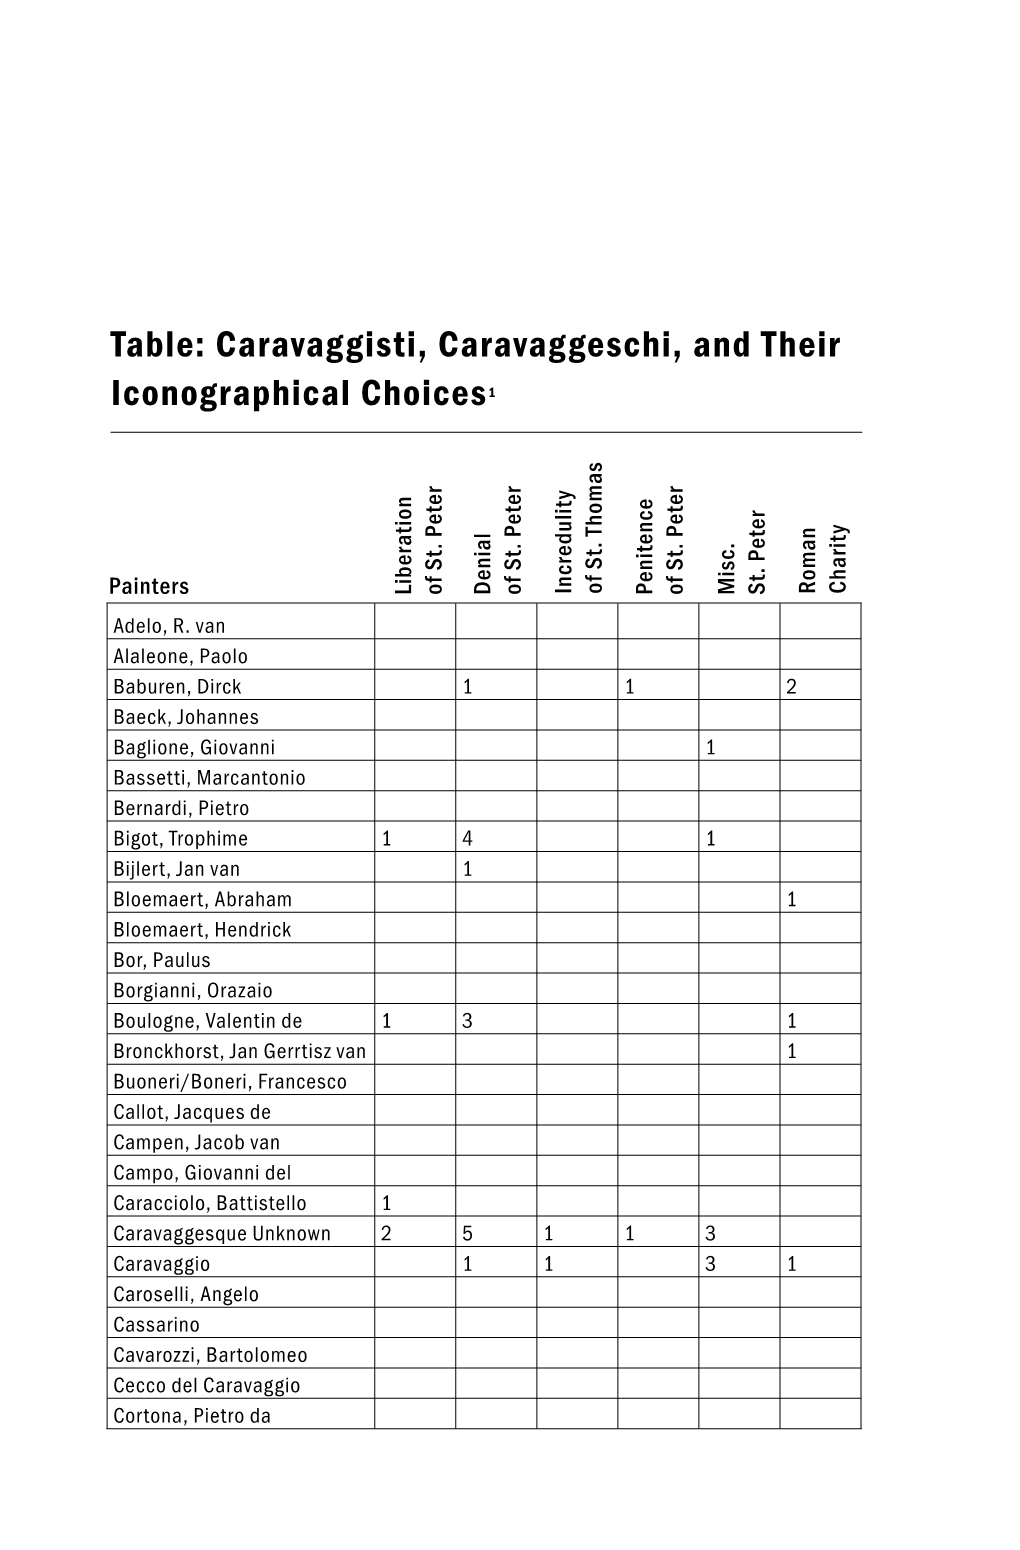 Table: Caravaggisti, Caravaggeschi, and Their Iconographical Choices1